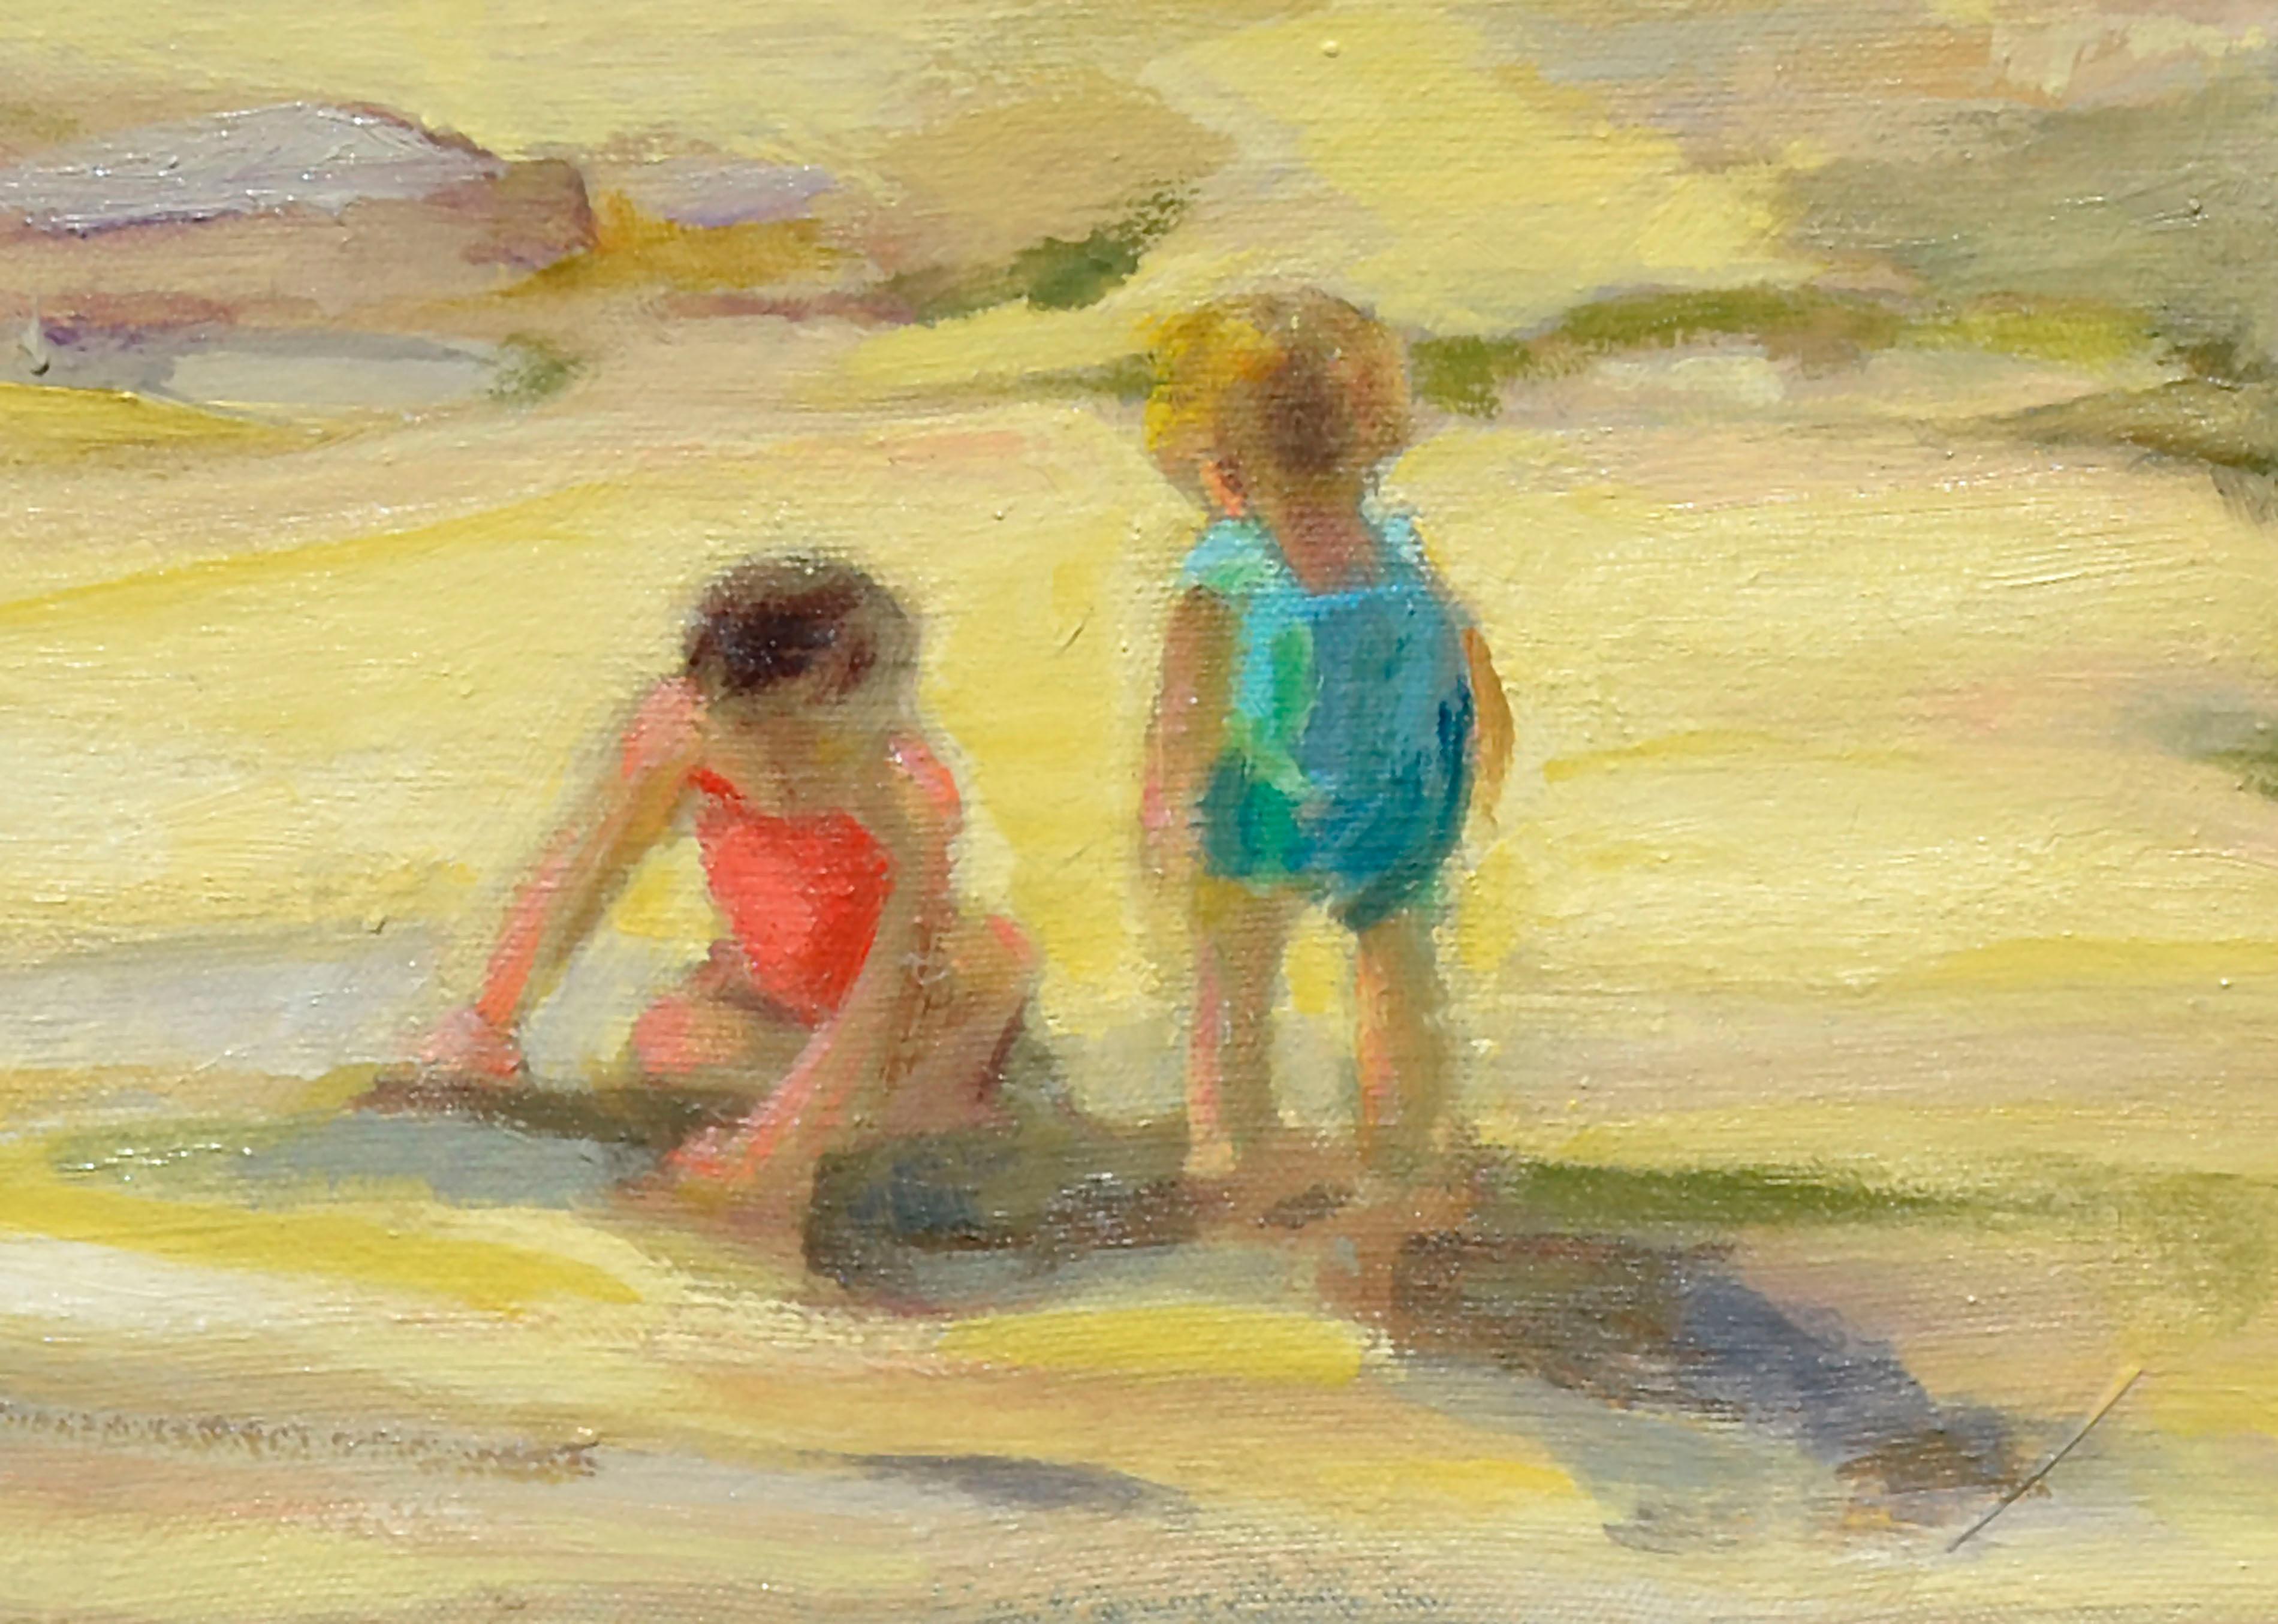 San Francisco Beach Day 1960 - Brown Figurative Painting by Ruth Kinkead Duhring